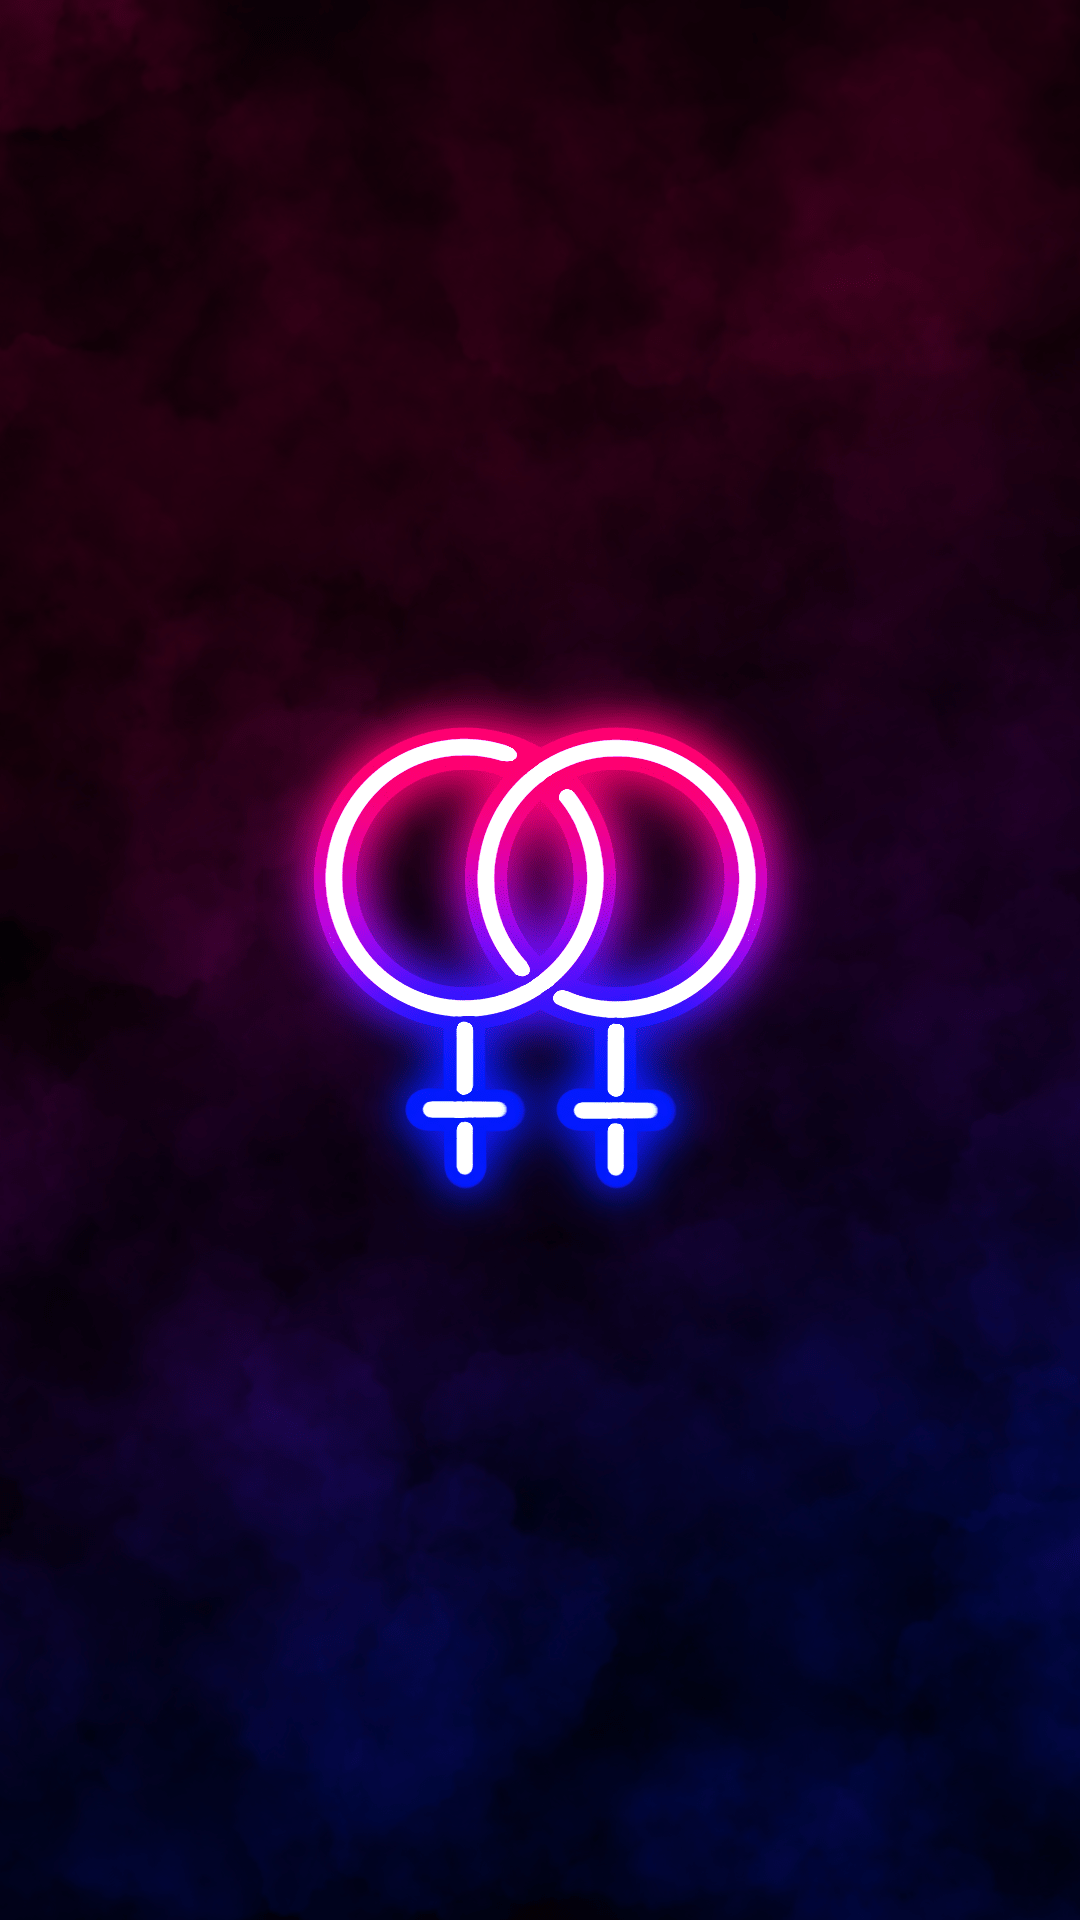 A neon sign with two people holding hands - Gay, pride